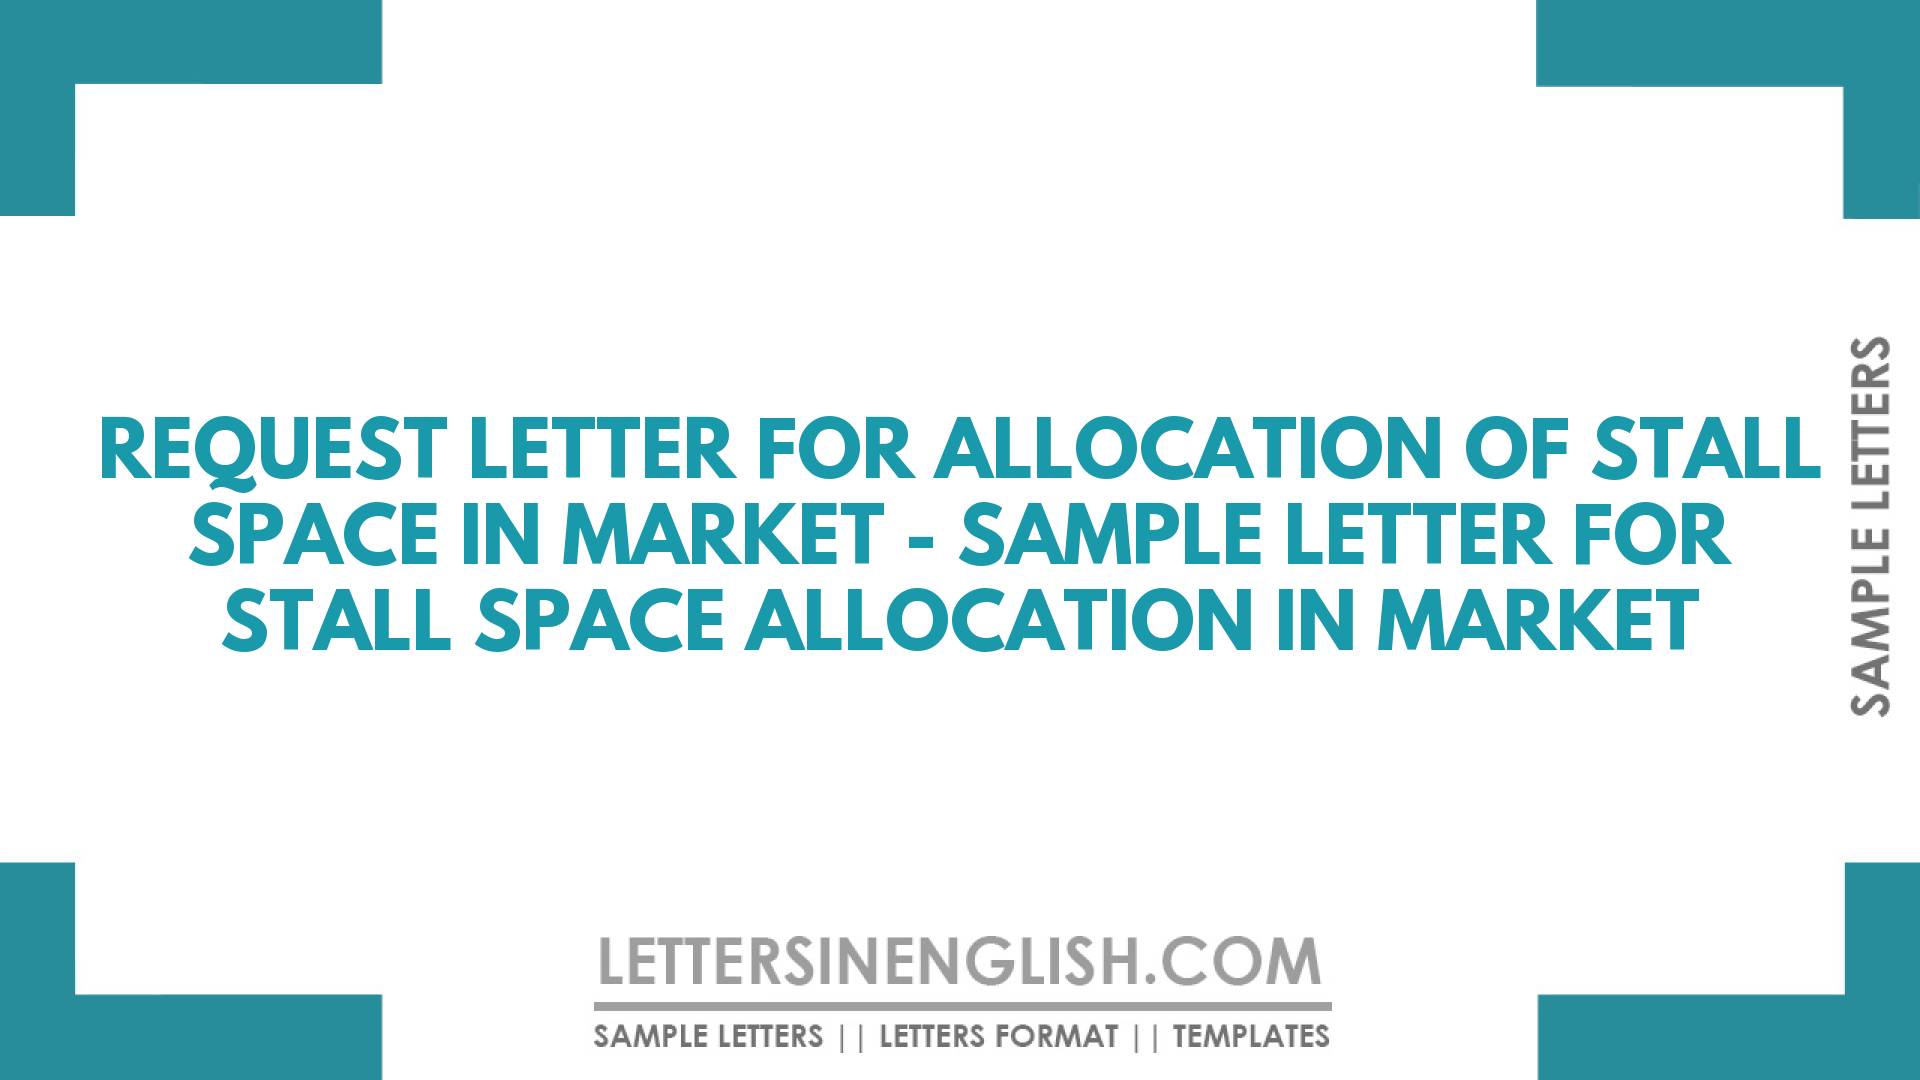 Request Letter for Allocation of Stall Space in Market – Sample Letter for Stall Space Allocation in Market